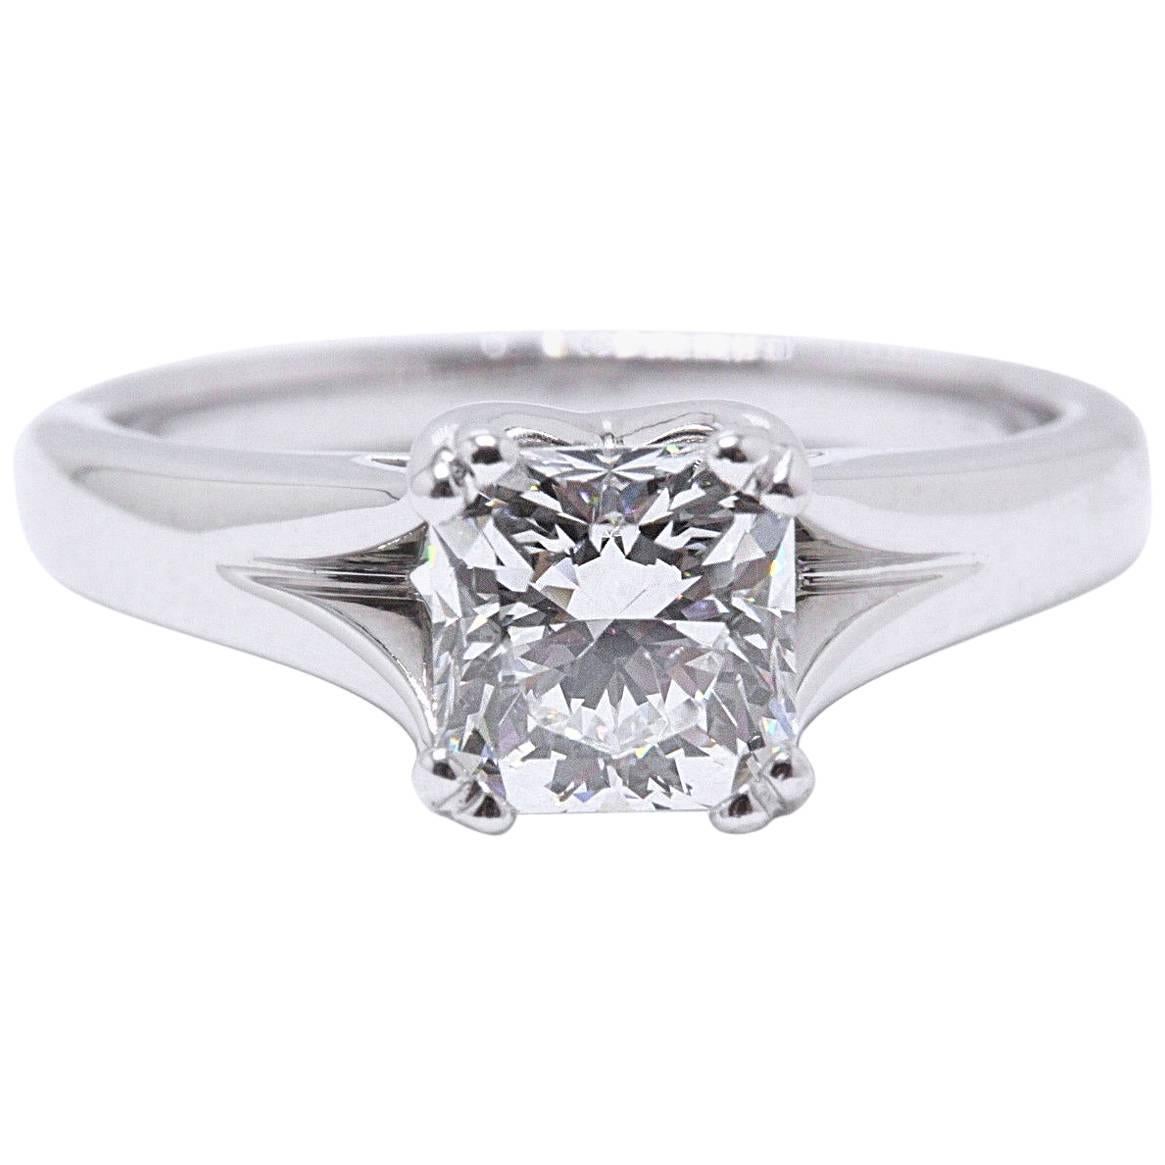 Hearts on Fire Square Dream Cut 1.13 Carat D SI1 Diamond Engagement Ring